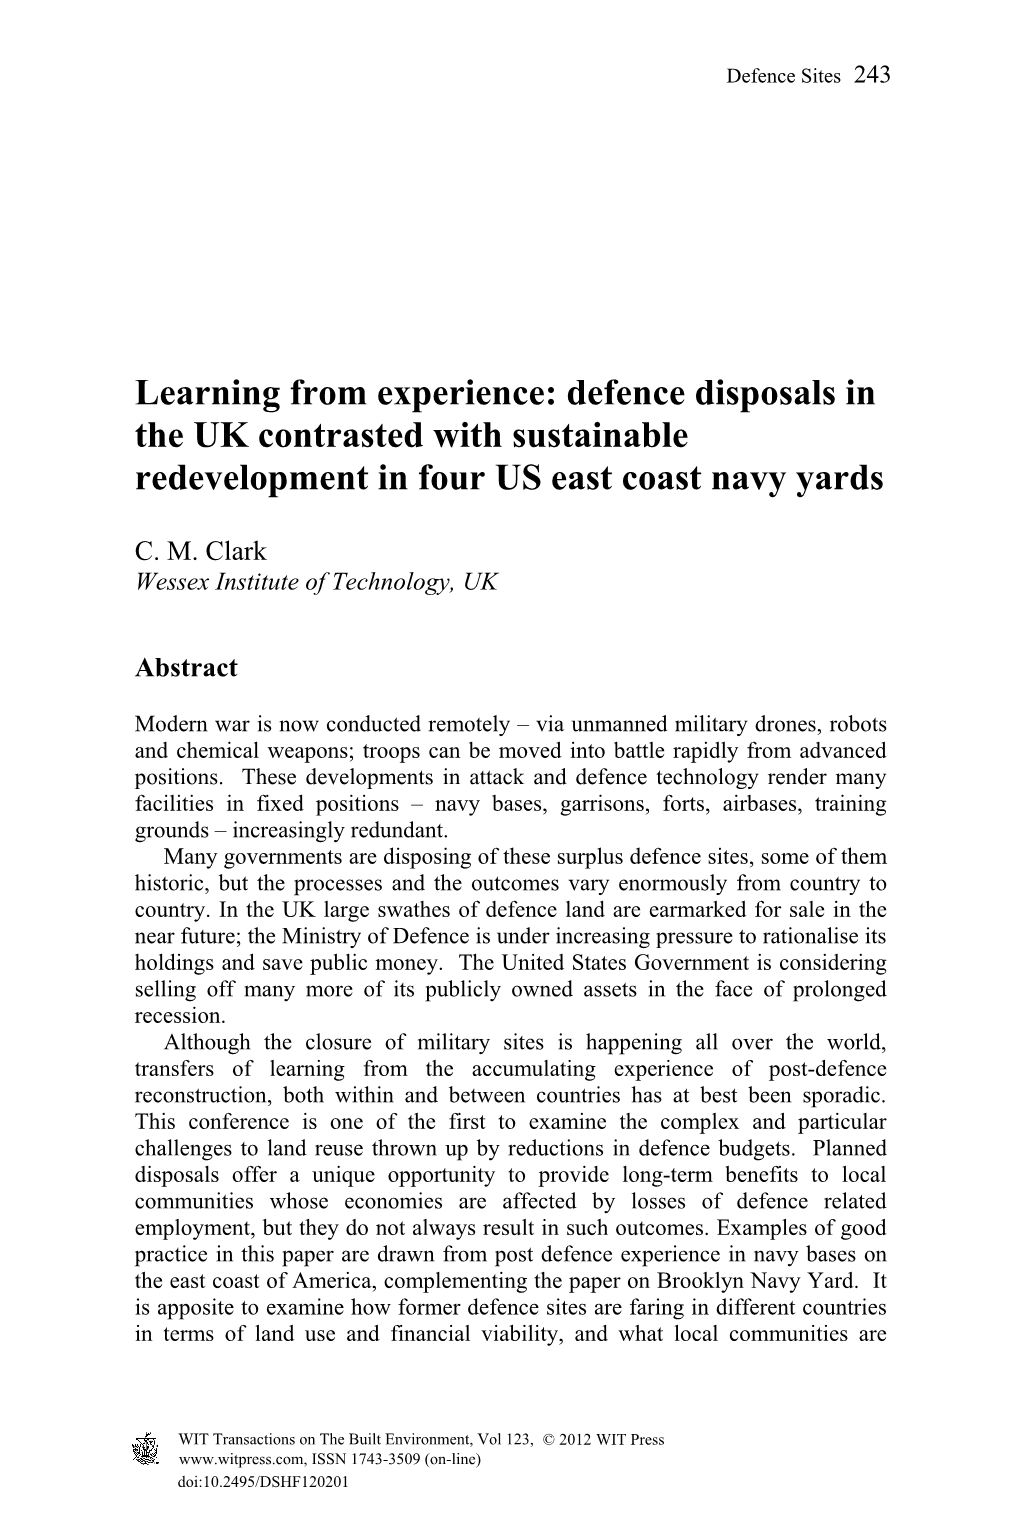 Defence Disposals in the UK Contrasted with Sustainable Redevelopment in Four US East Coast Navy Yards